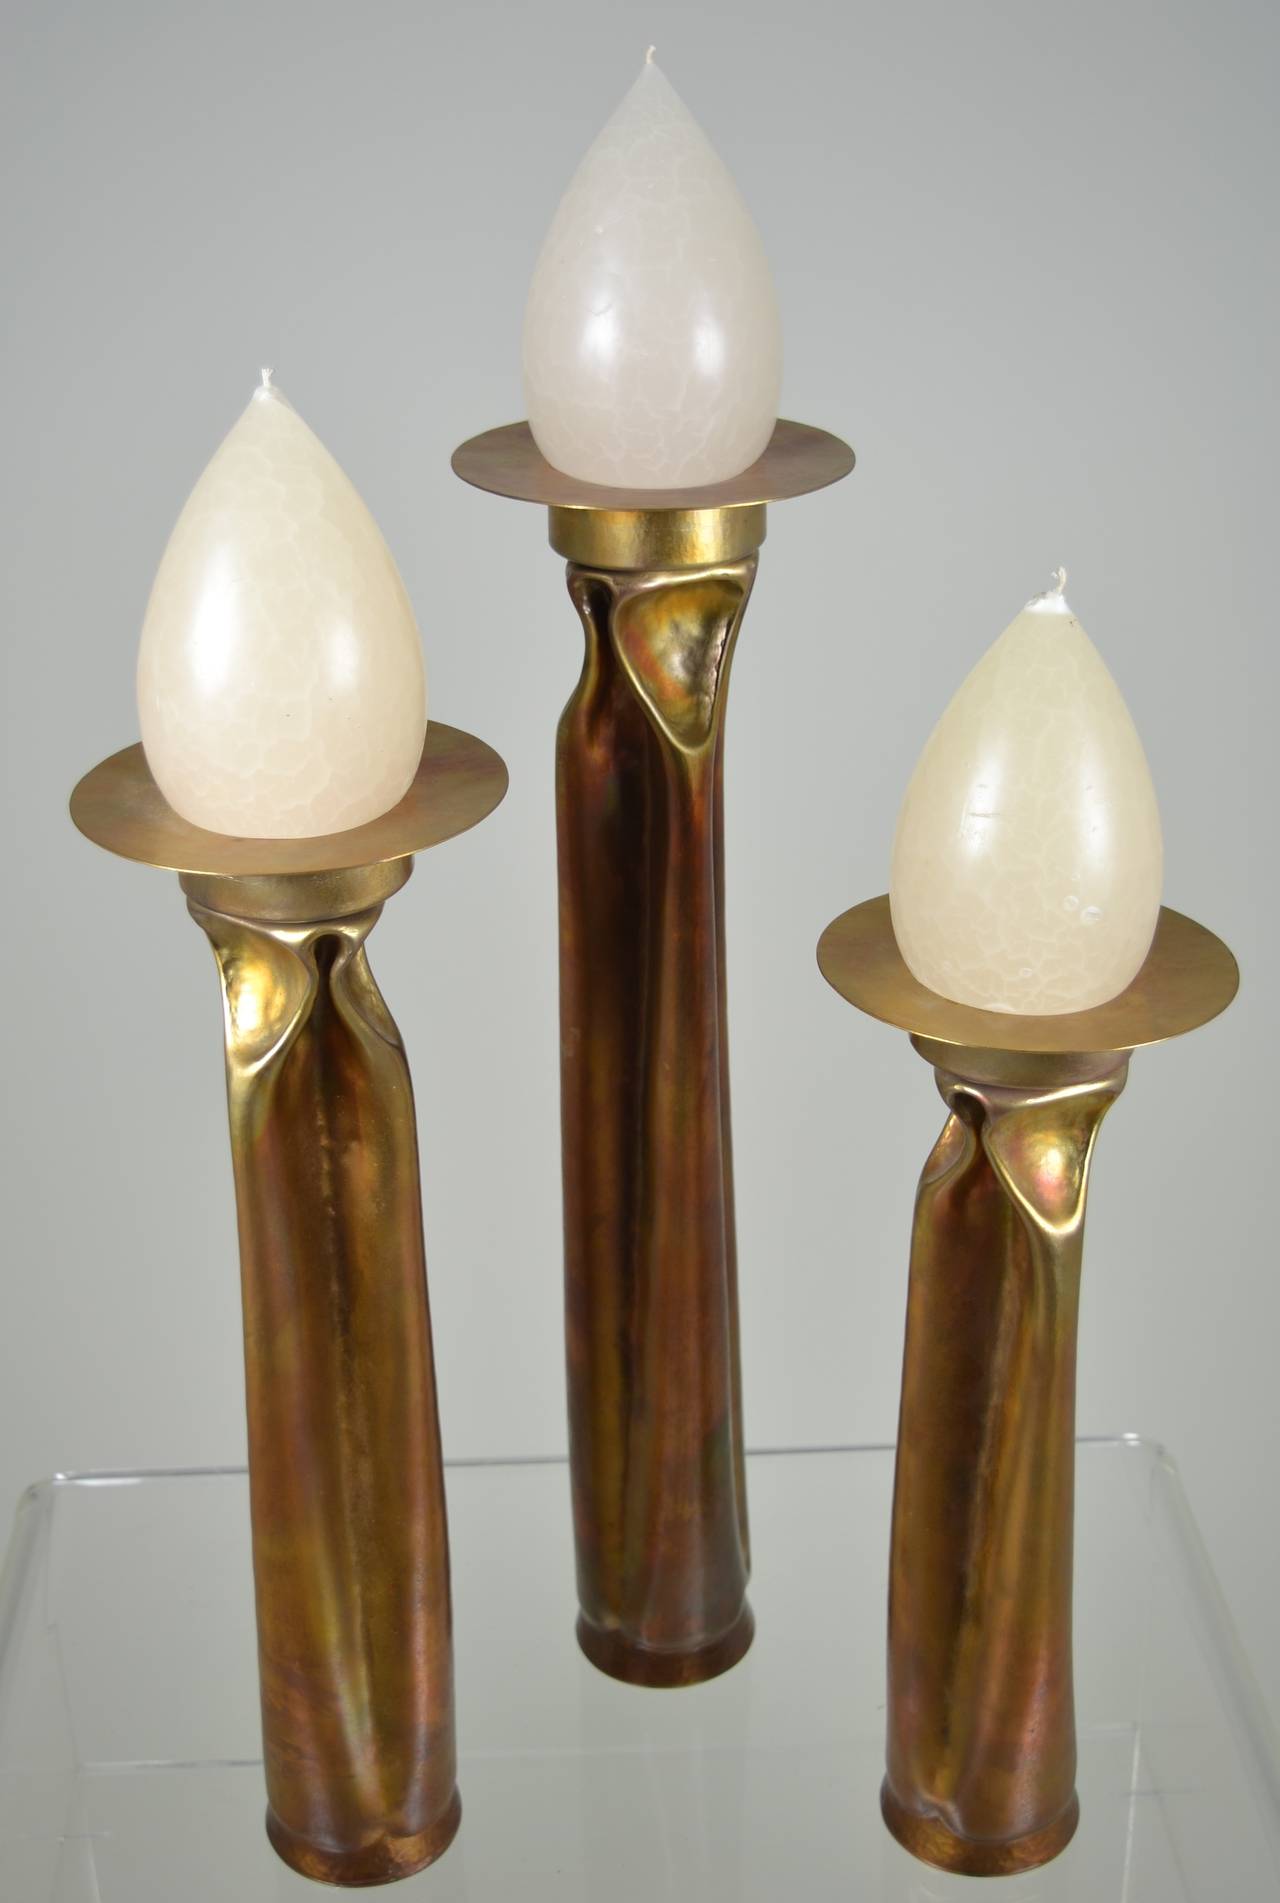 Amazing opalescent finish on this set of three-tiered candlesticks, copper oxide with brass candle dish. Exceptional examples of works by Markusen, well known for innovative metalsmithing, recognized by museums around the world. Each candleholder is